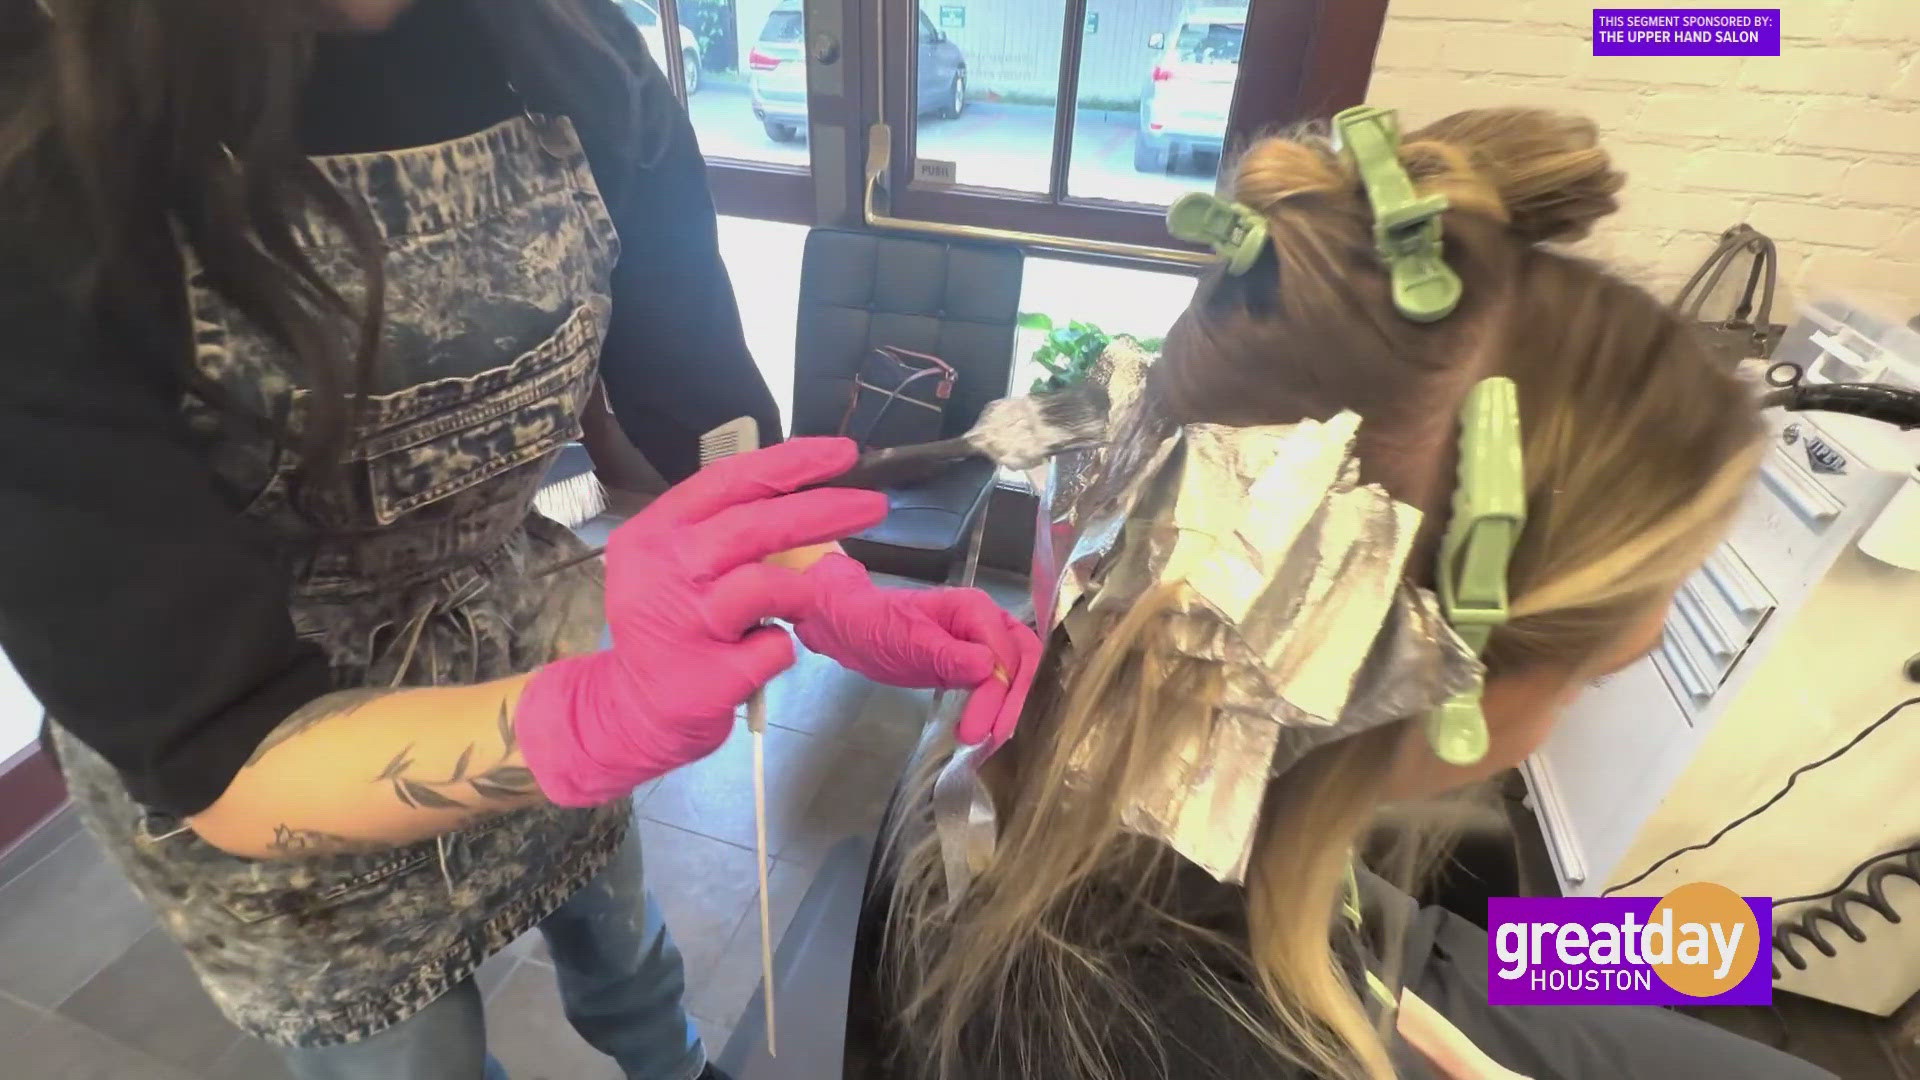 A new hairdo could mean a new you with help from The Upper Hand Salon